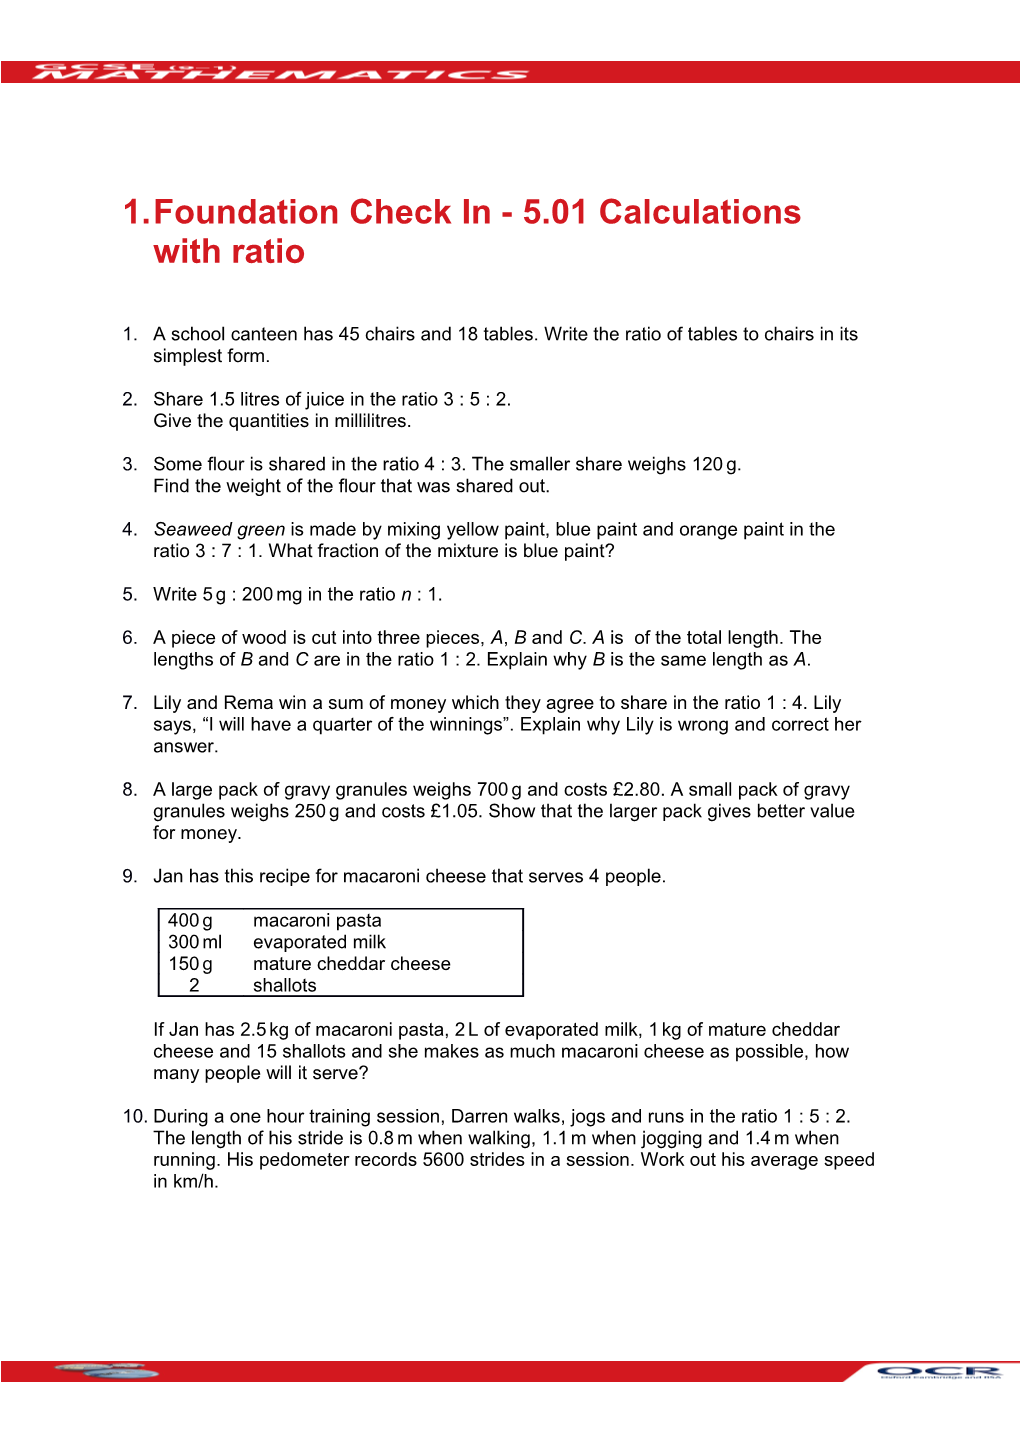 GCSE (9-1) Mathematics Foundation Check in Test (5.01 Calculations with Ratio)